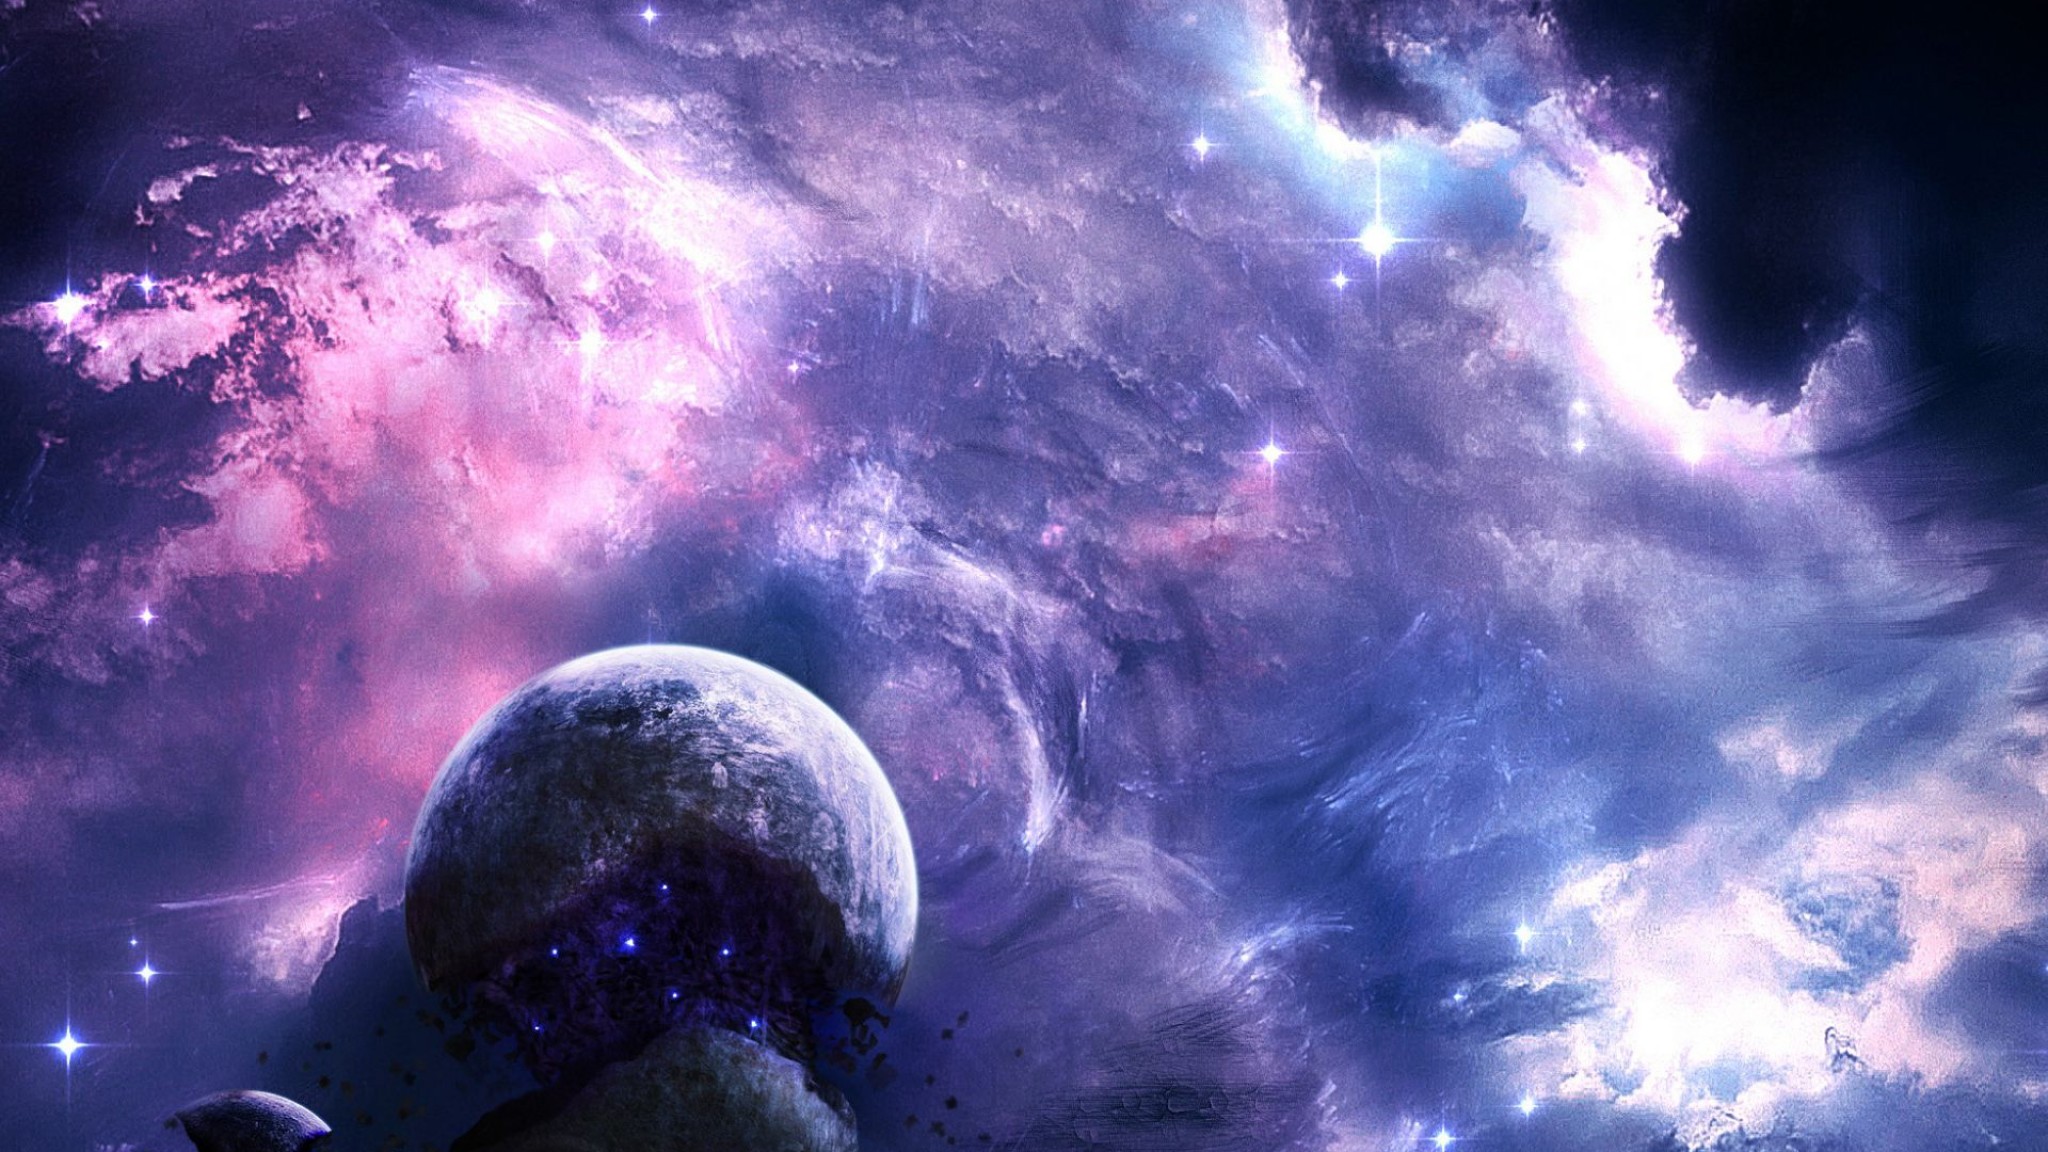 Wallpaper Galaxy Must Be Pleted In Day